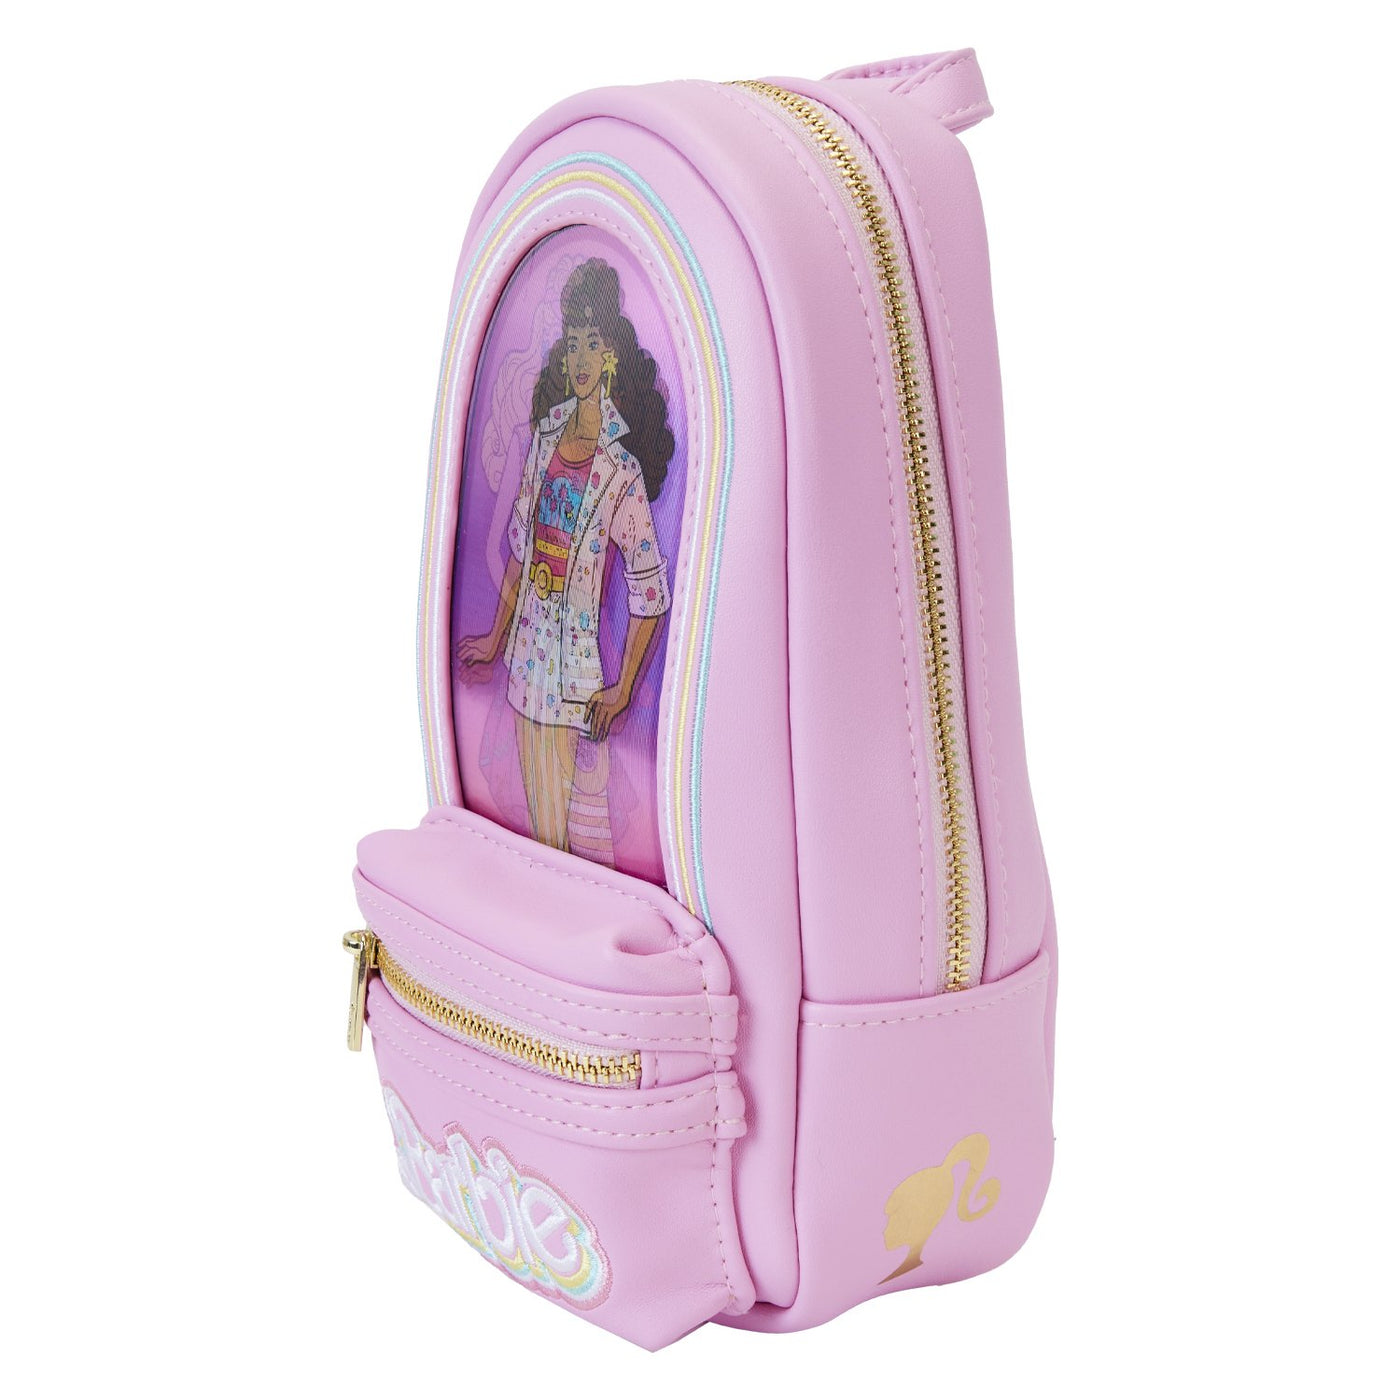 Loungefly Mattel Barbie 65th Anniversary Mini Backpack Pencil Case - Side 3